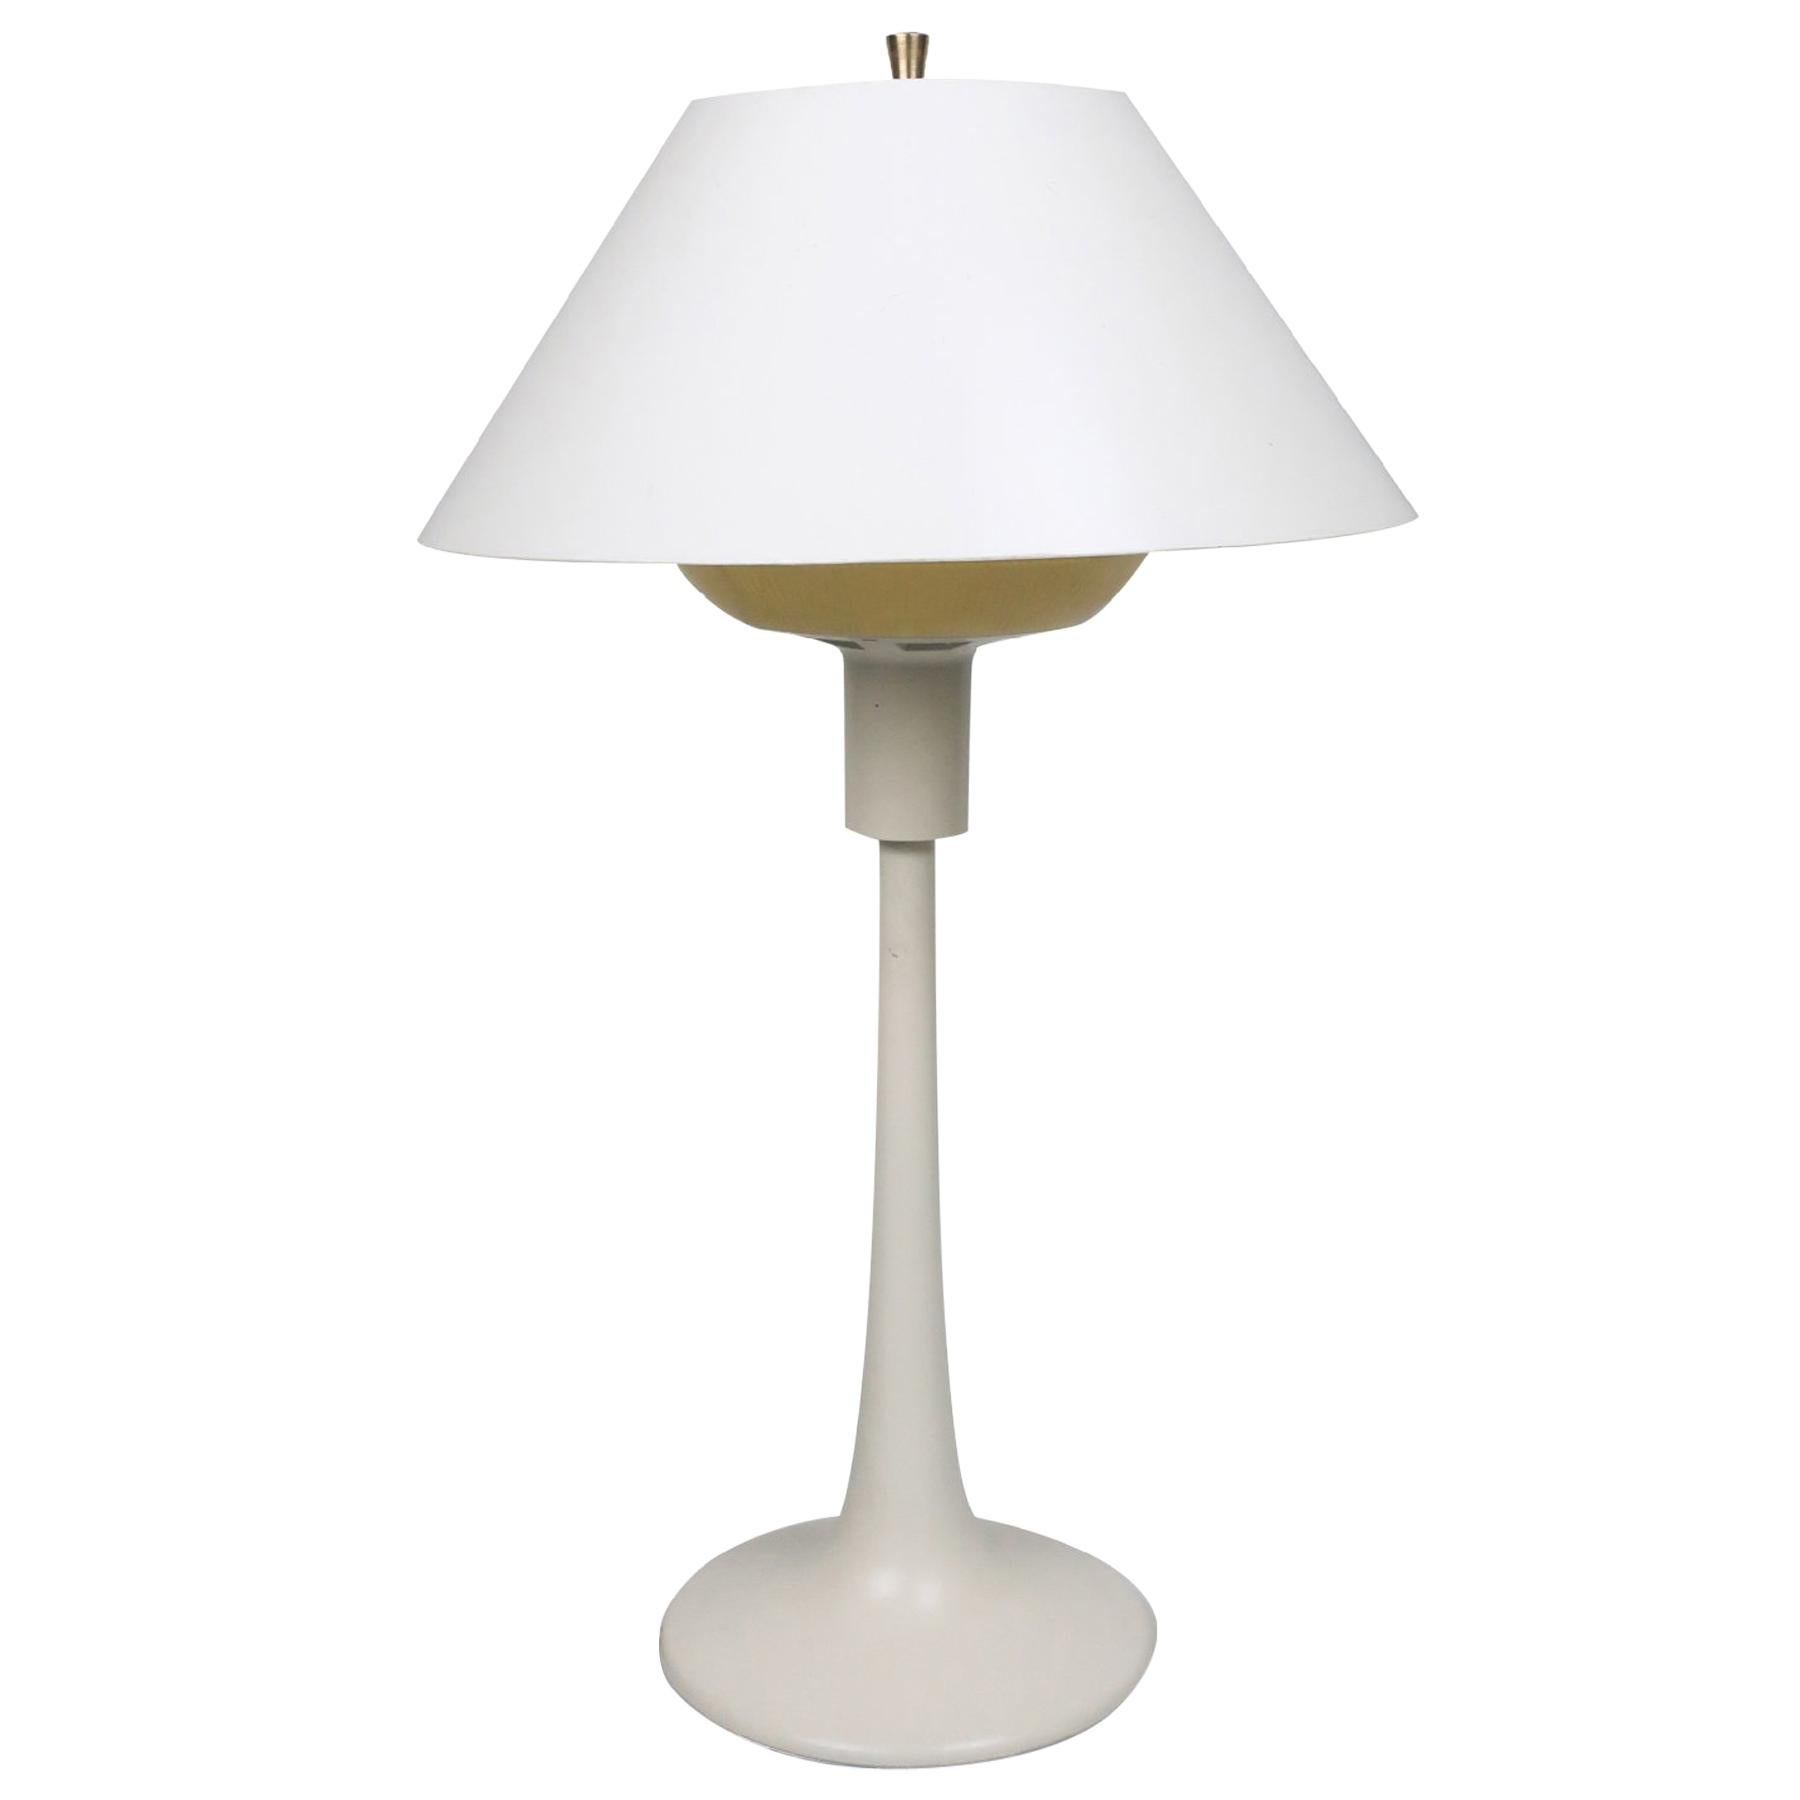 Vintage Tulip Table Lamp by Gerald Thurston for Lightolier